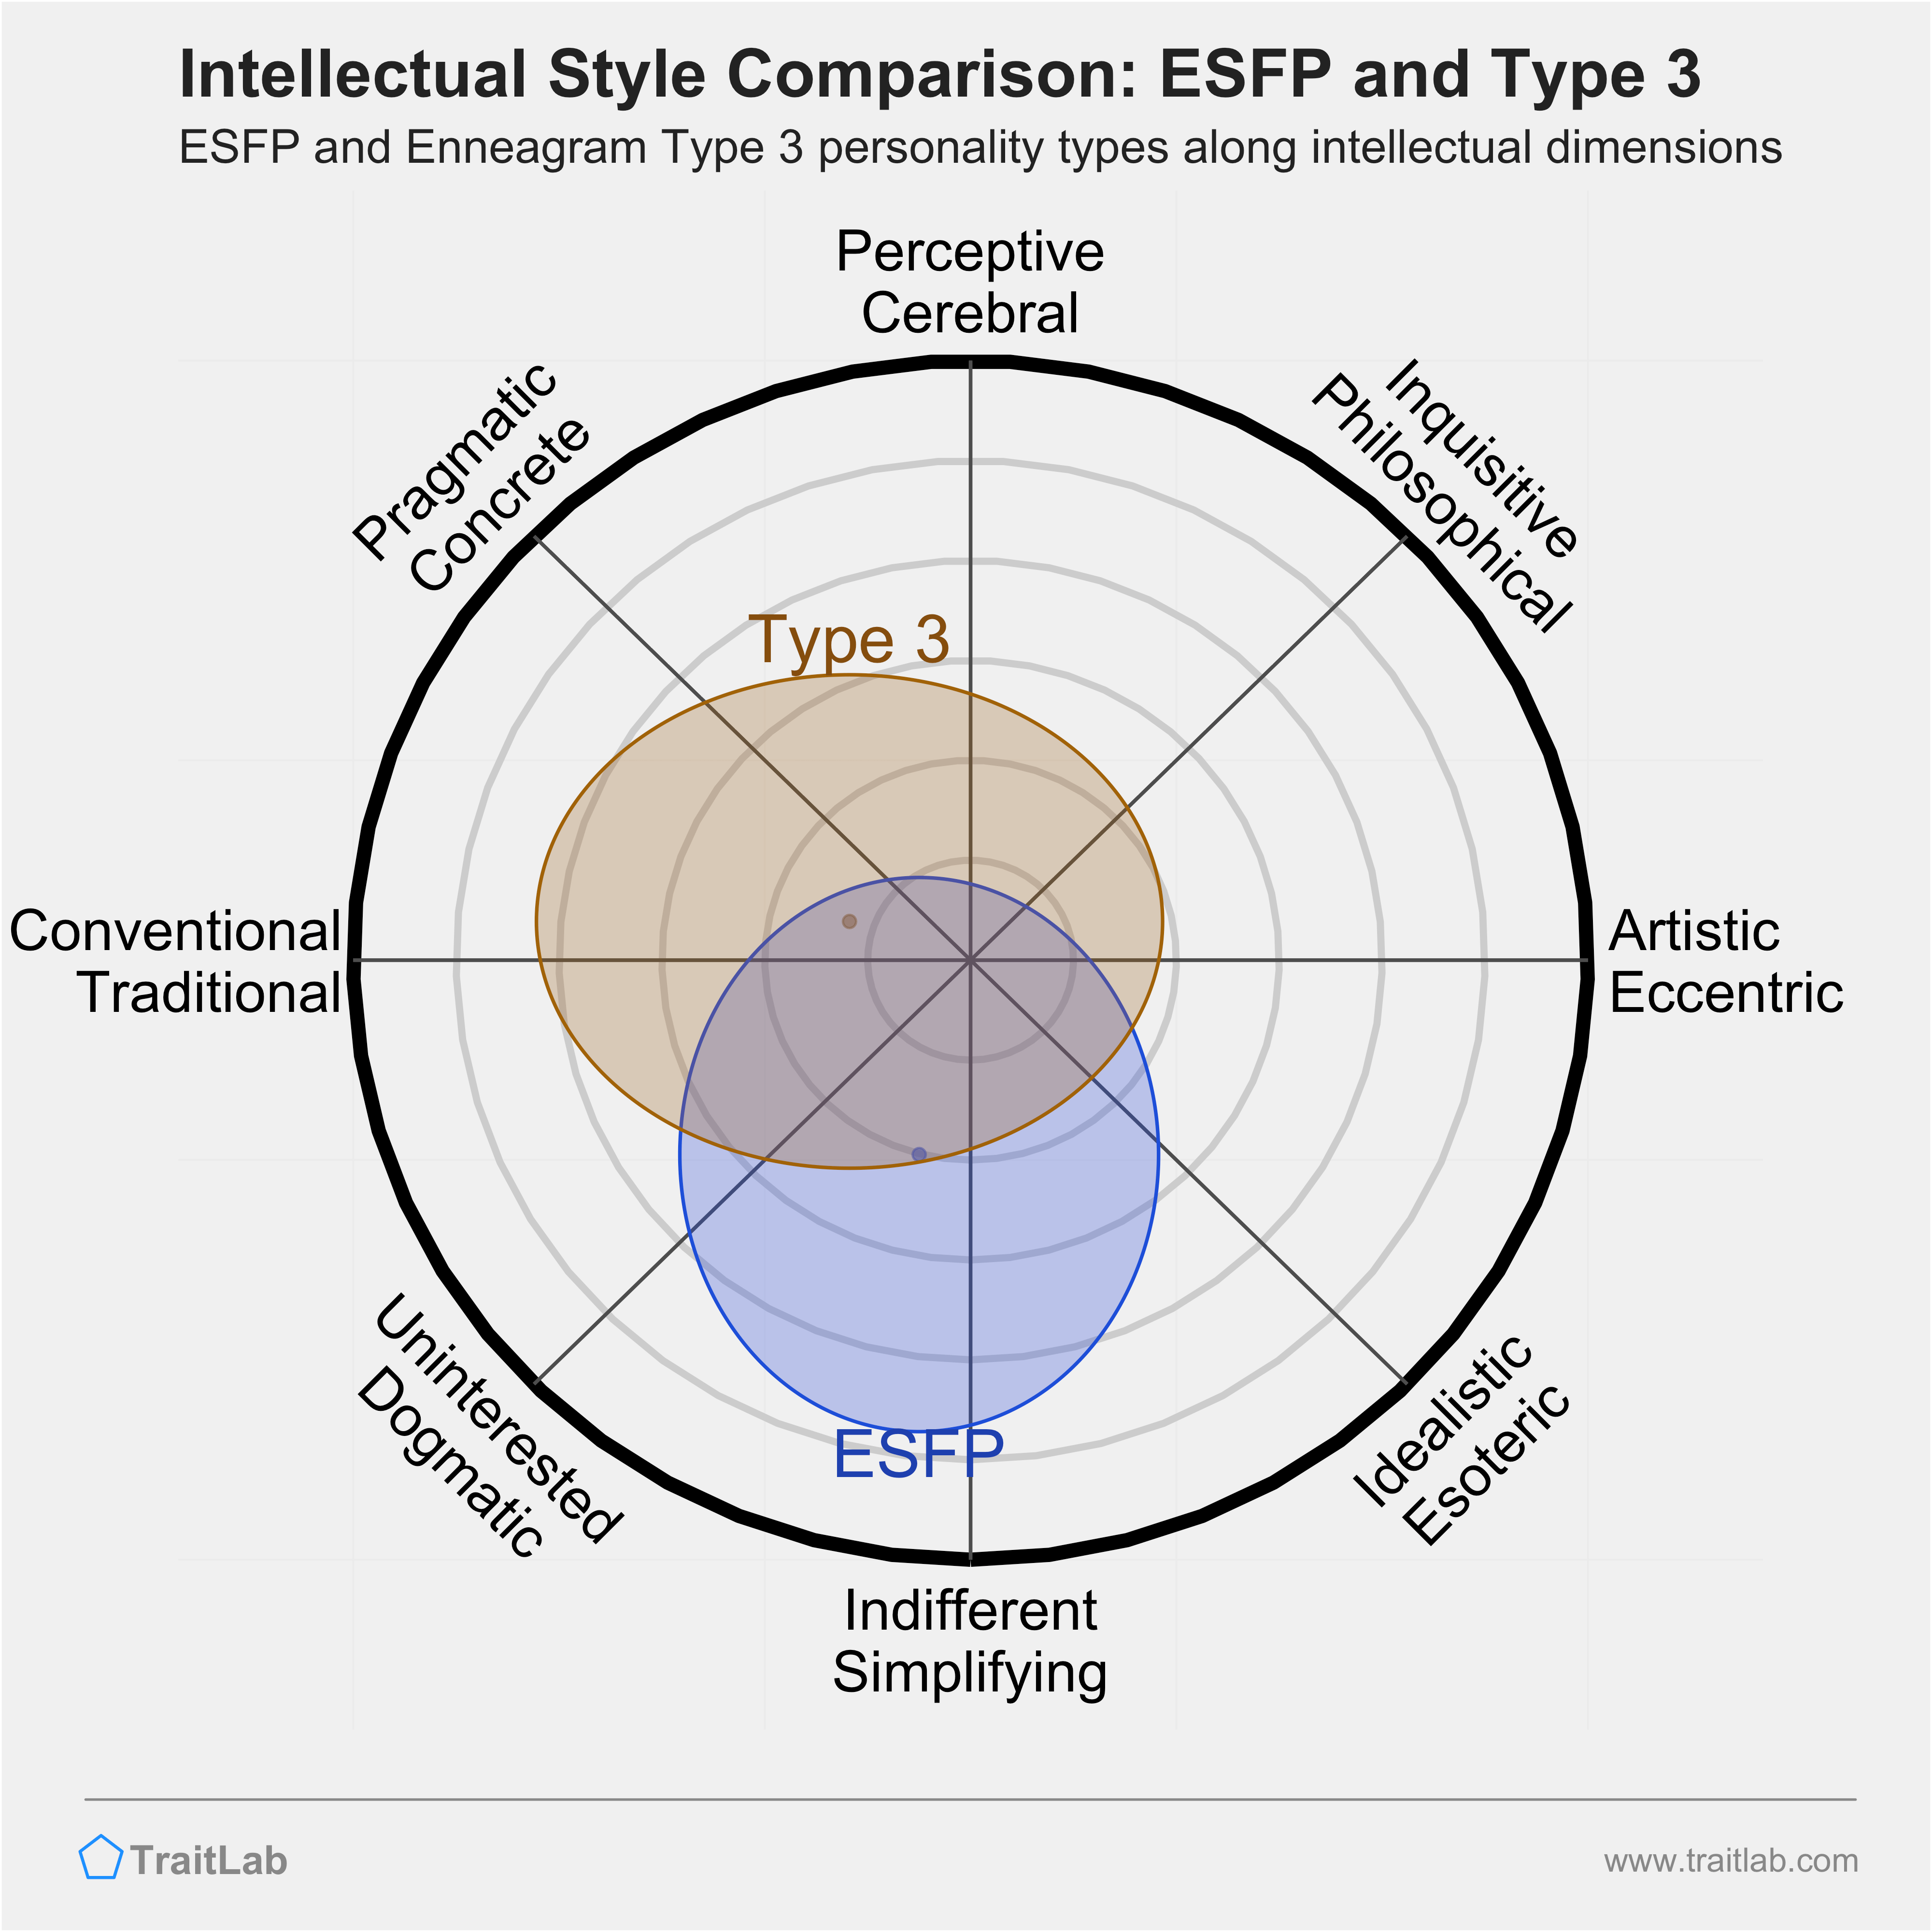 ESFP and Type 3 comparison across intellectual dimensions